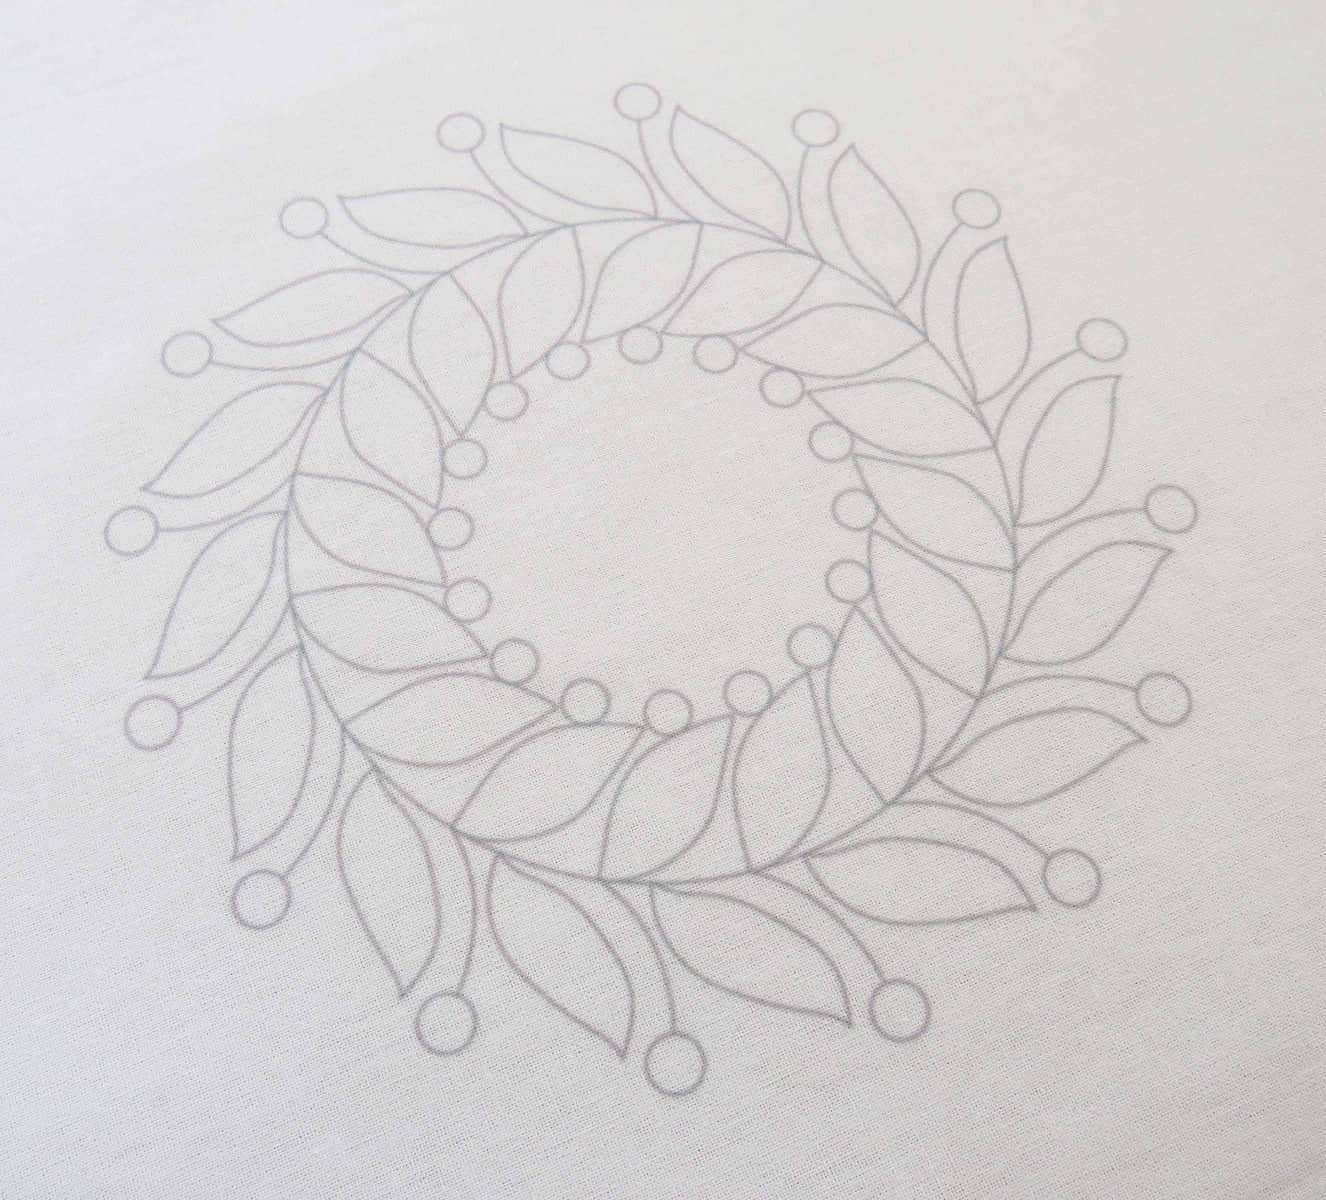 Golden Leaves, Pre Printed Embroidery Fabric Panel , Pre Printed Fabric Pattern , StitchDoodles , embroidery hoop kit, embroidery kits for adults, embroidery kits for beginners, hand embroidery, hand embroidery fabric, modern embroidery kits, PDF pattern, unique embroidery kits , StitchDoodles , shop.stitchdoodles.com